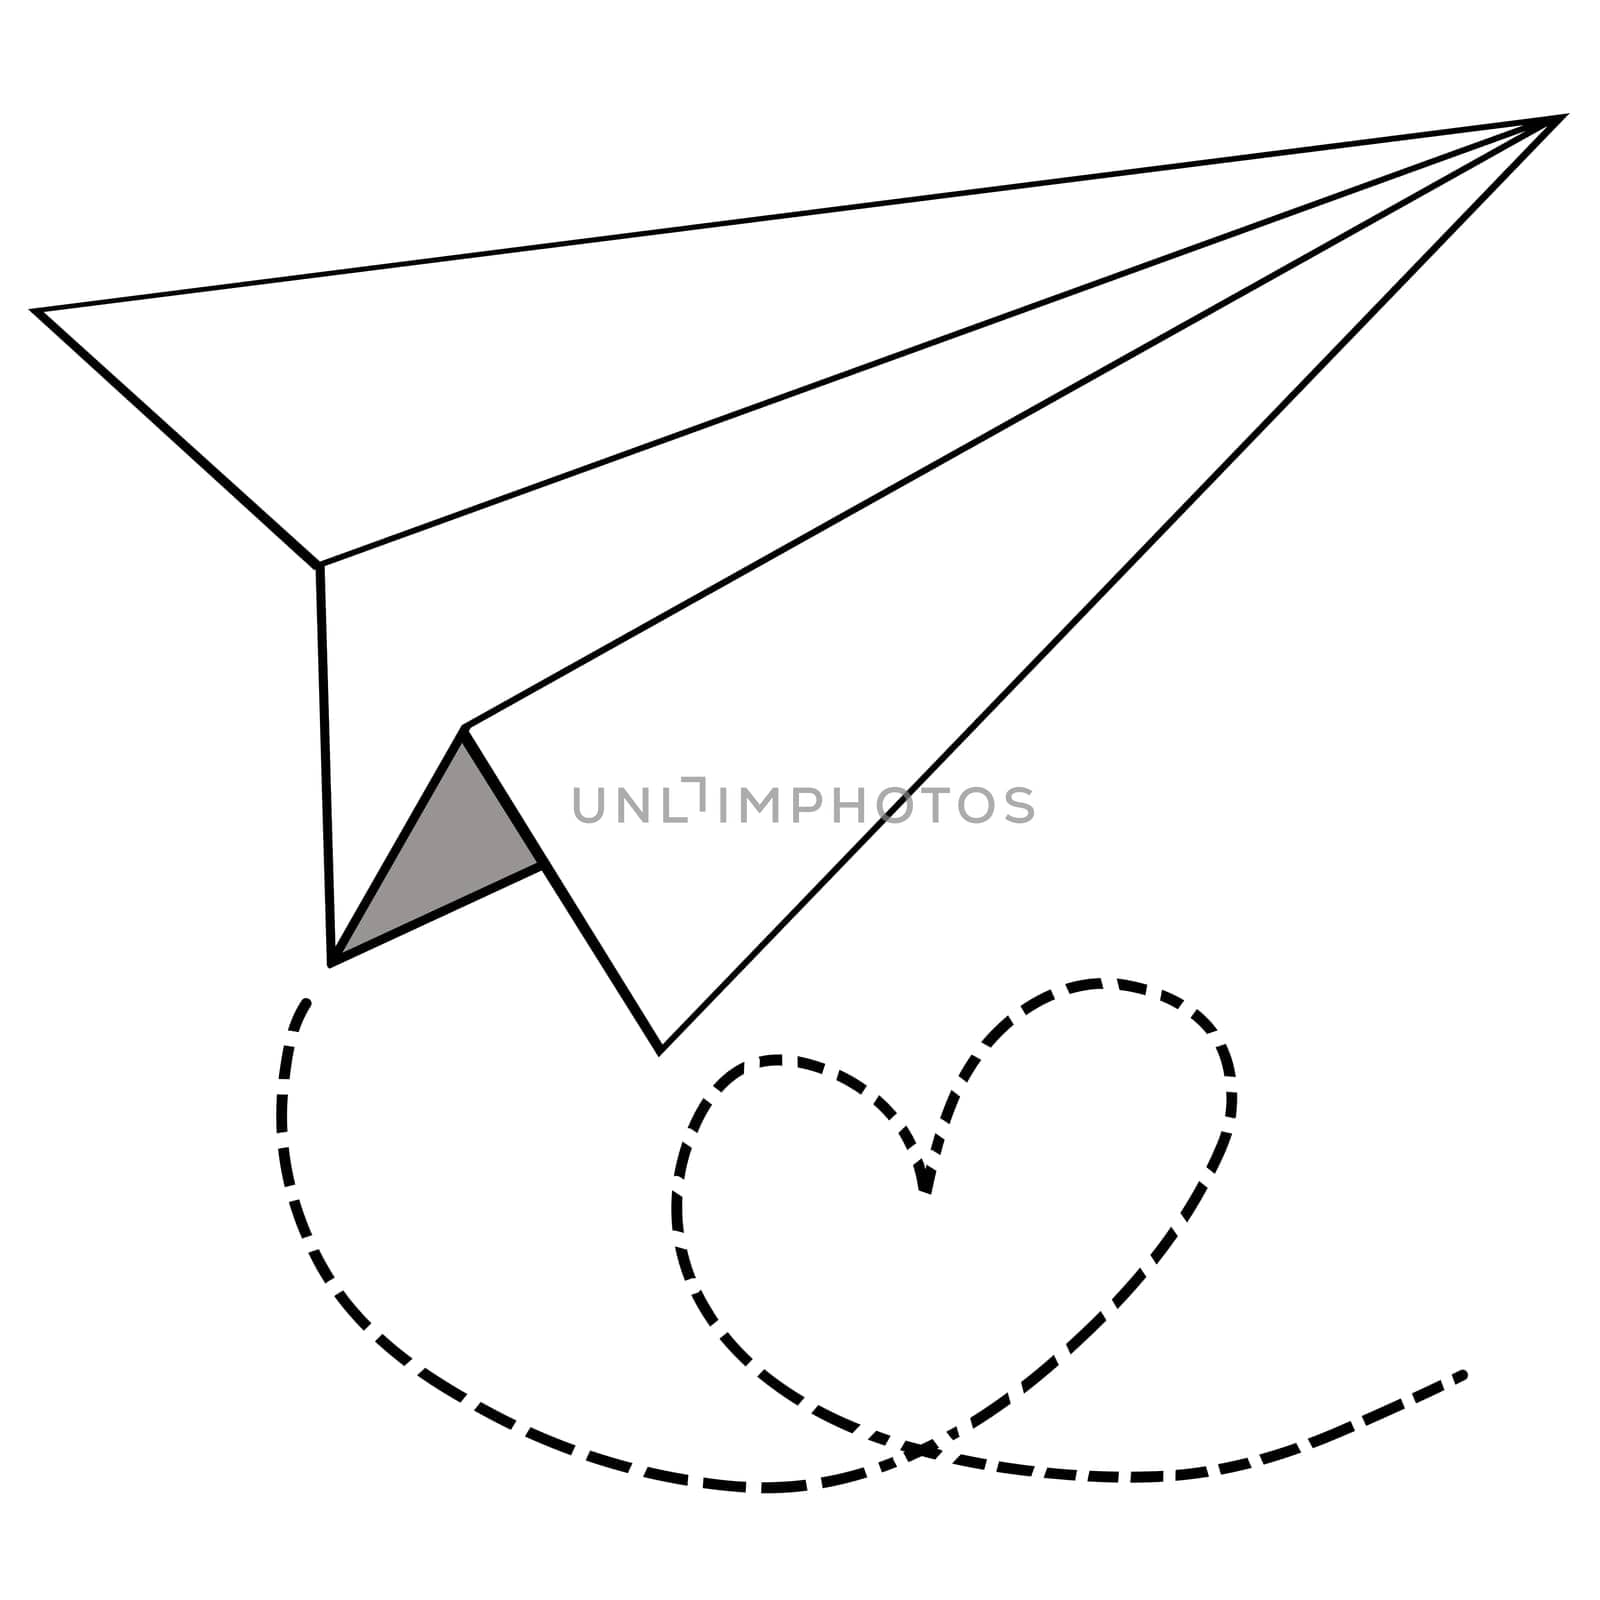 Drawing of paper plane flying isolated on white background for usage as an illustration concept